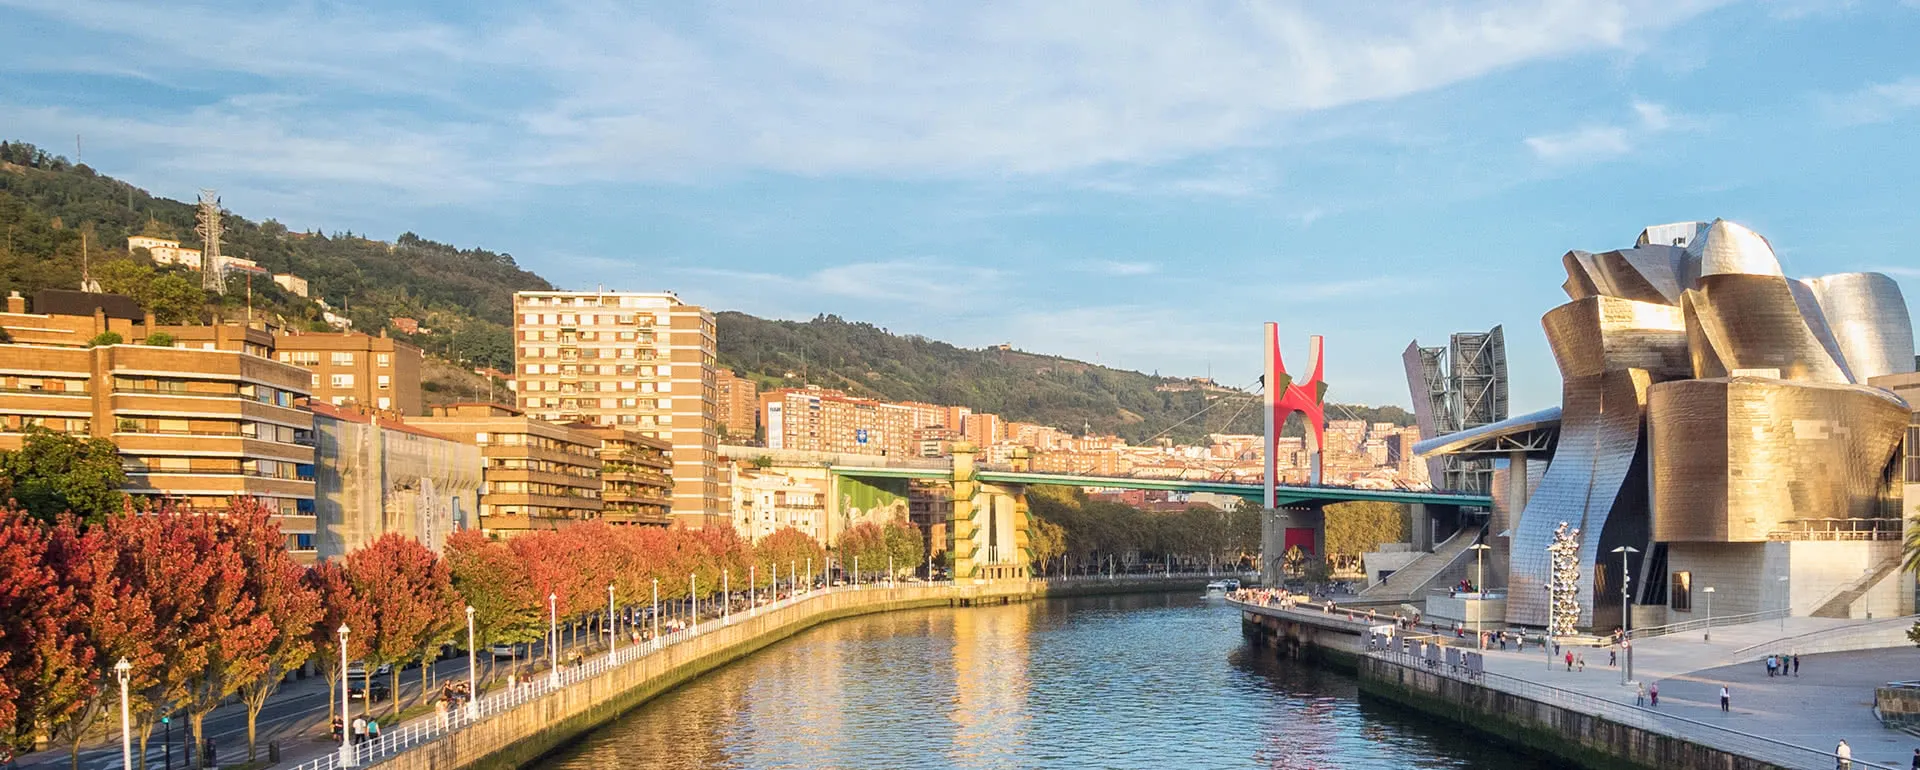 Meeting and conference location Bilbao